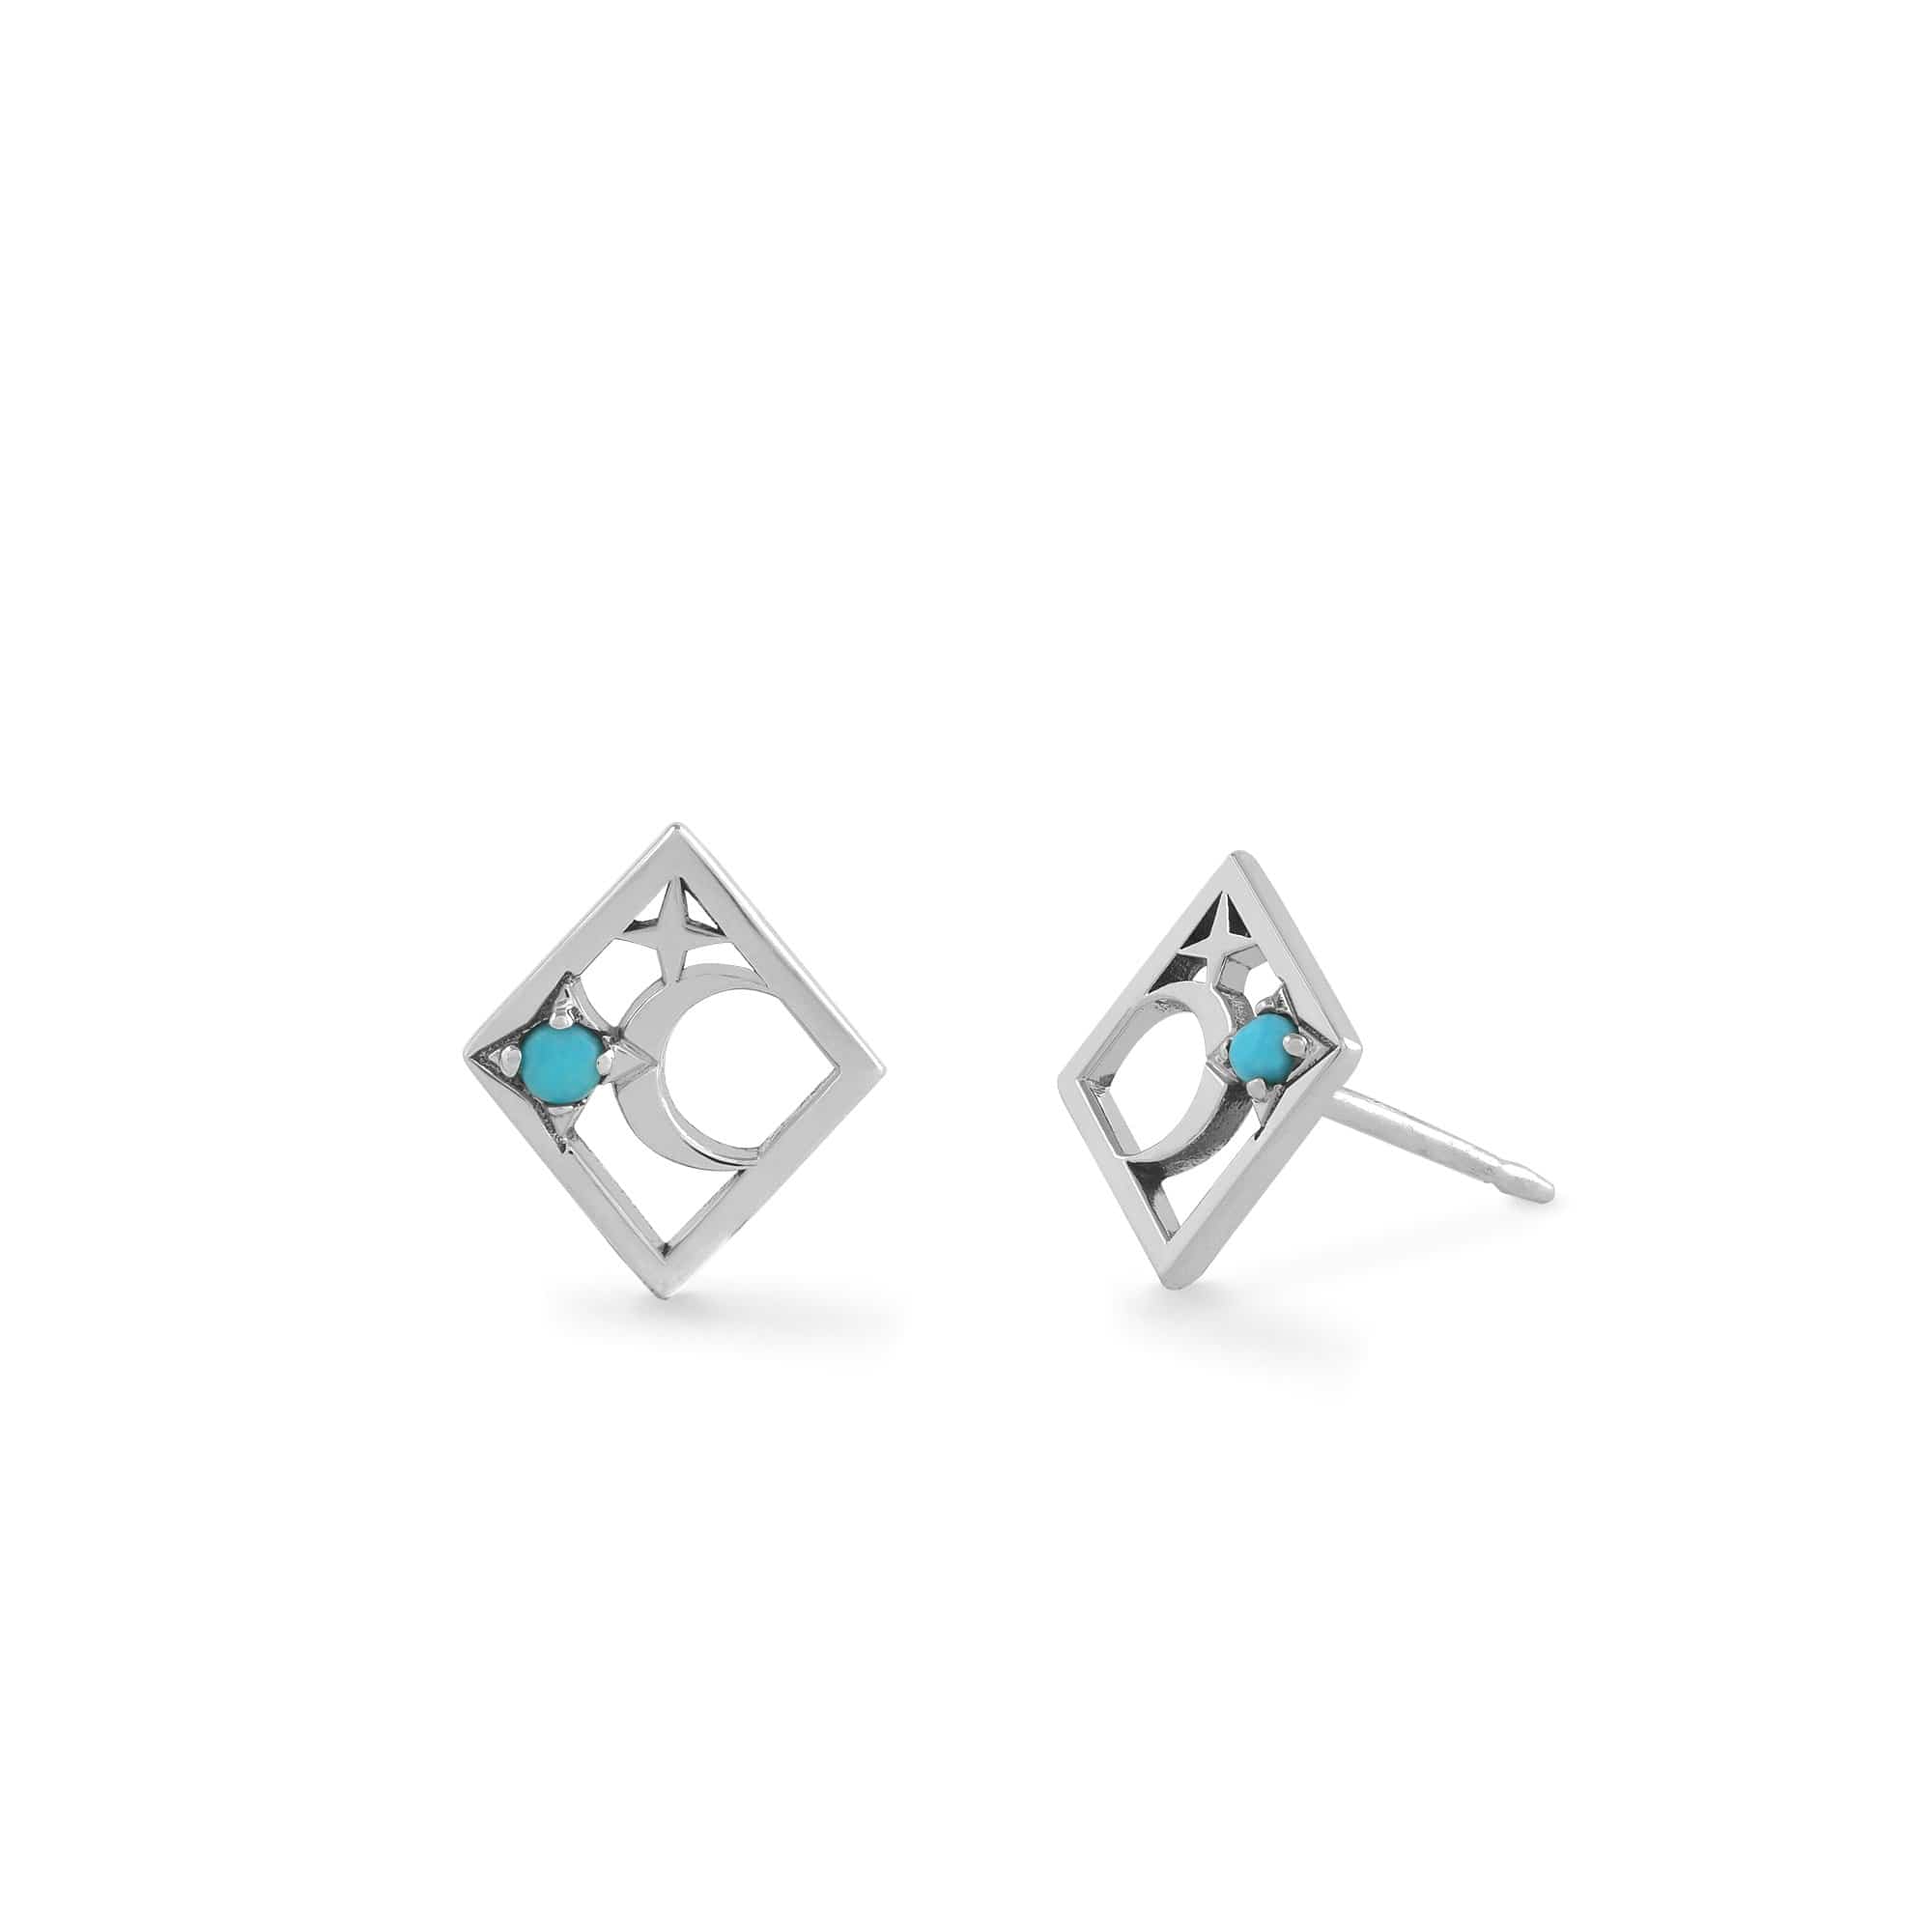 Boma Jewelry Earrings Moonlight Studs with Turquoise